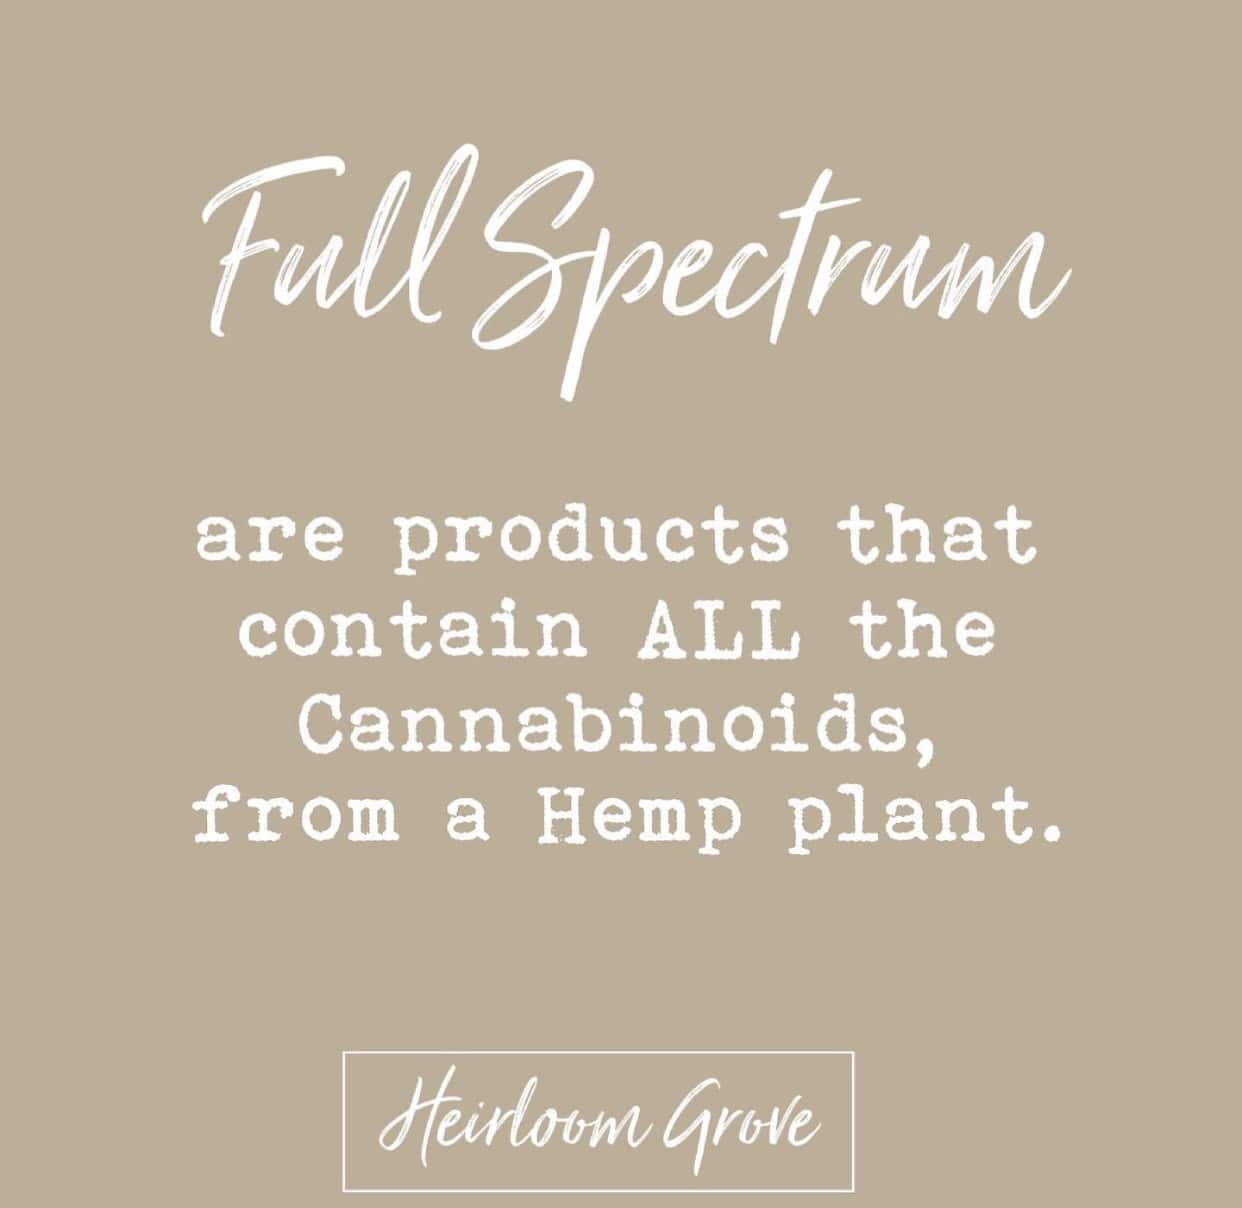 Featured image for “Full Spectrum Products”